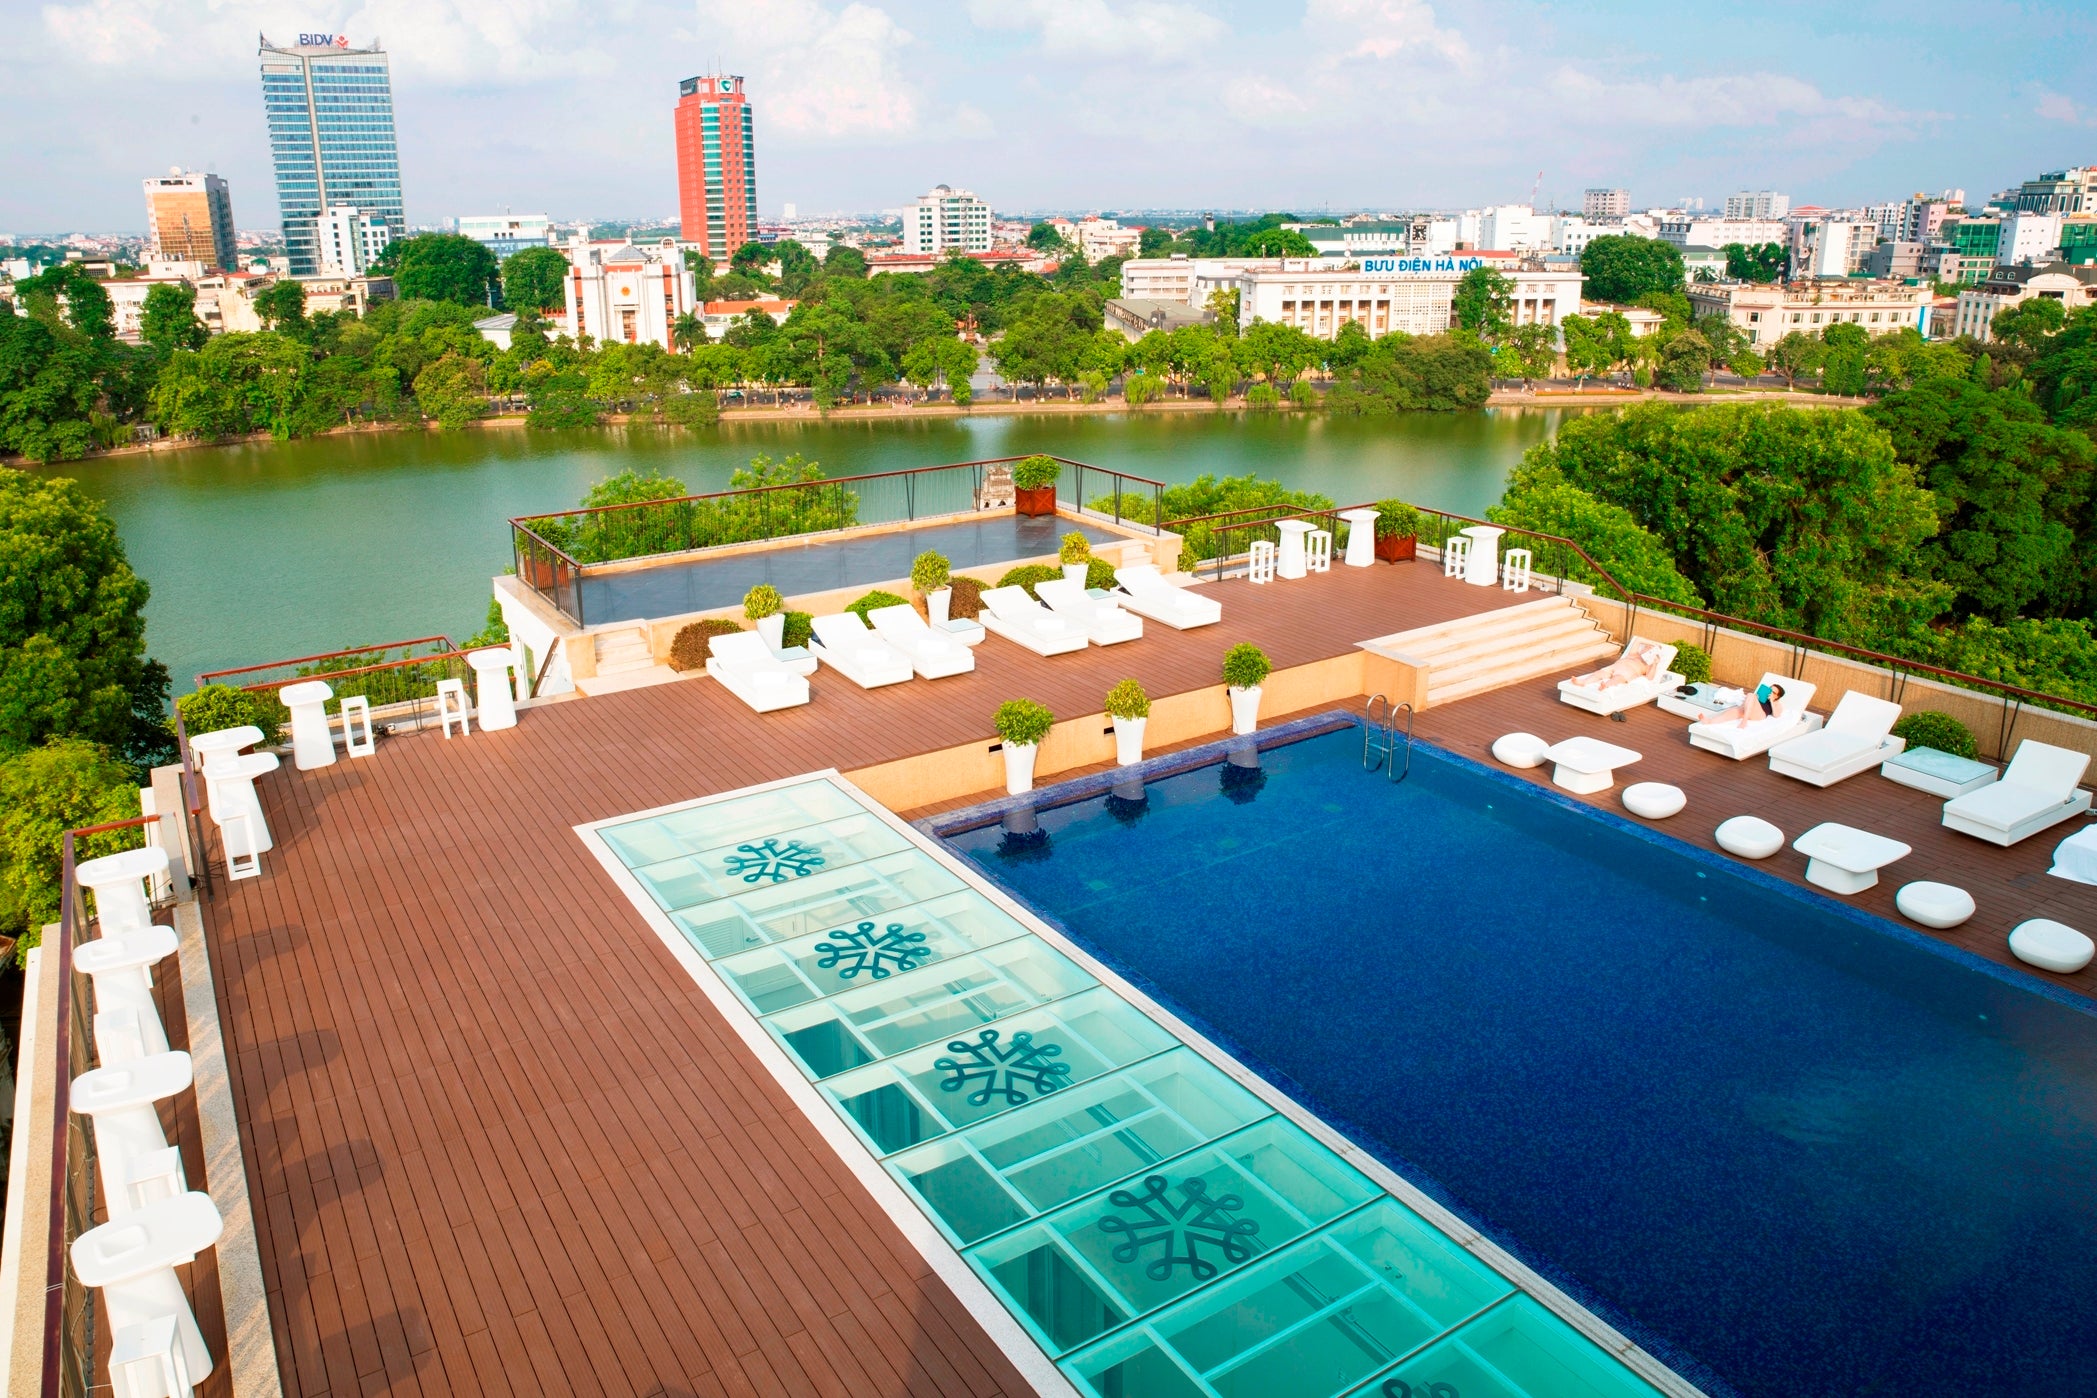 The rooftop swimming pool offers an excellent view of the city